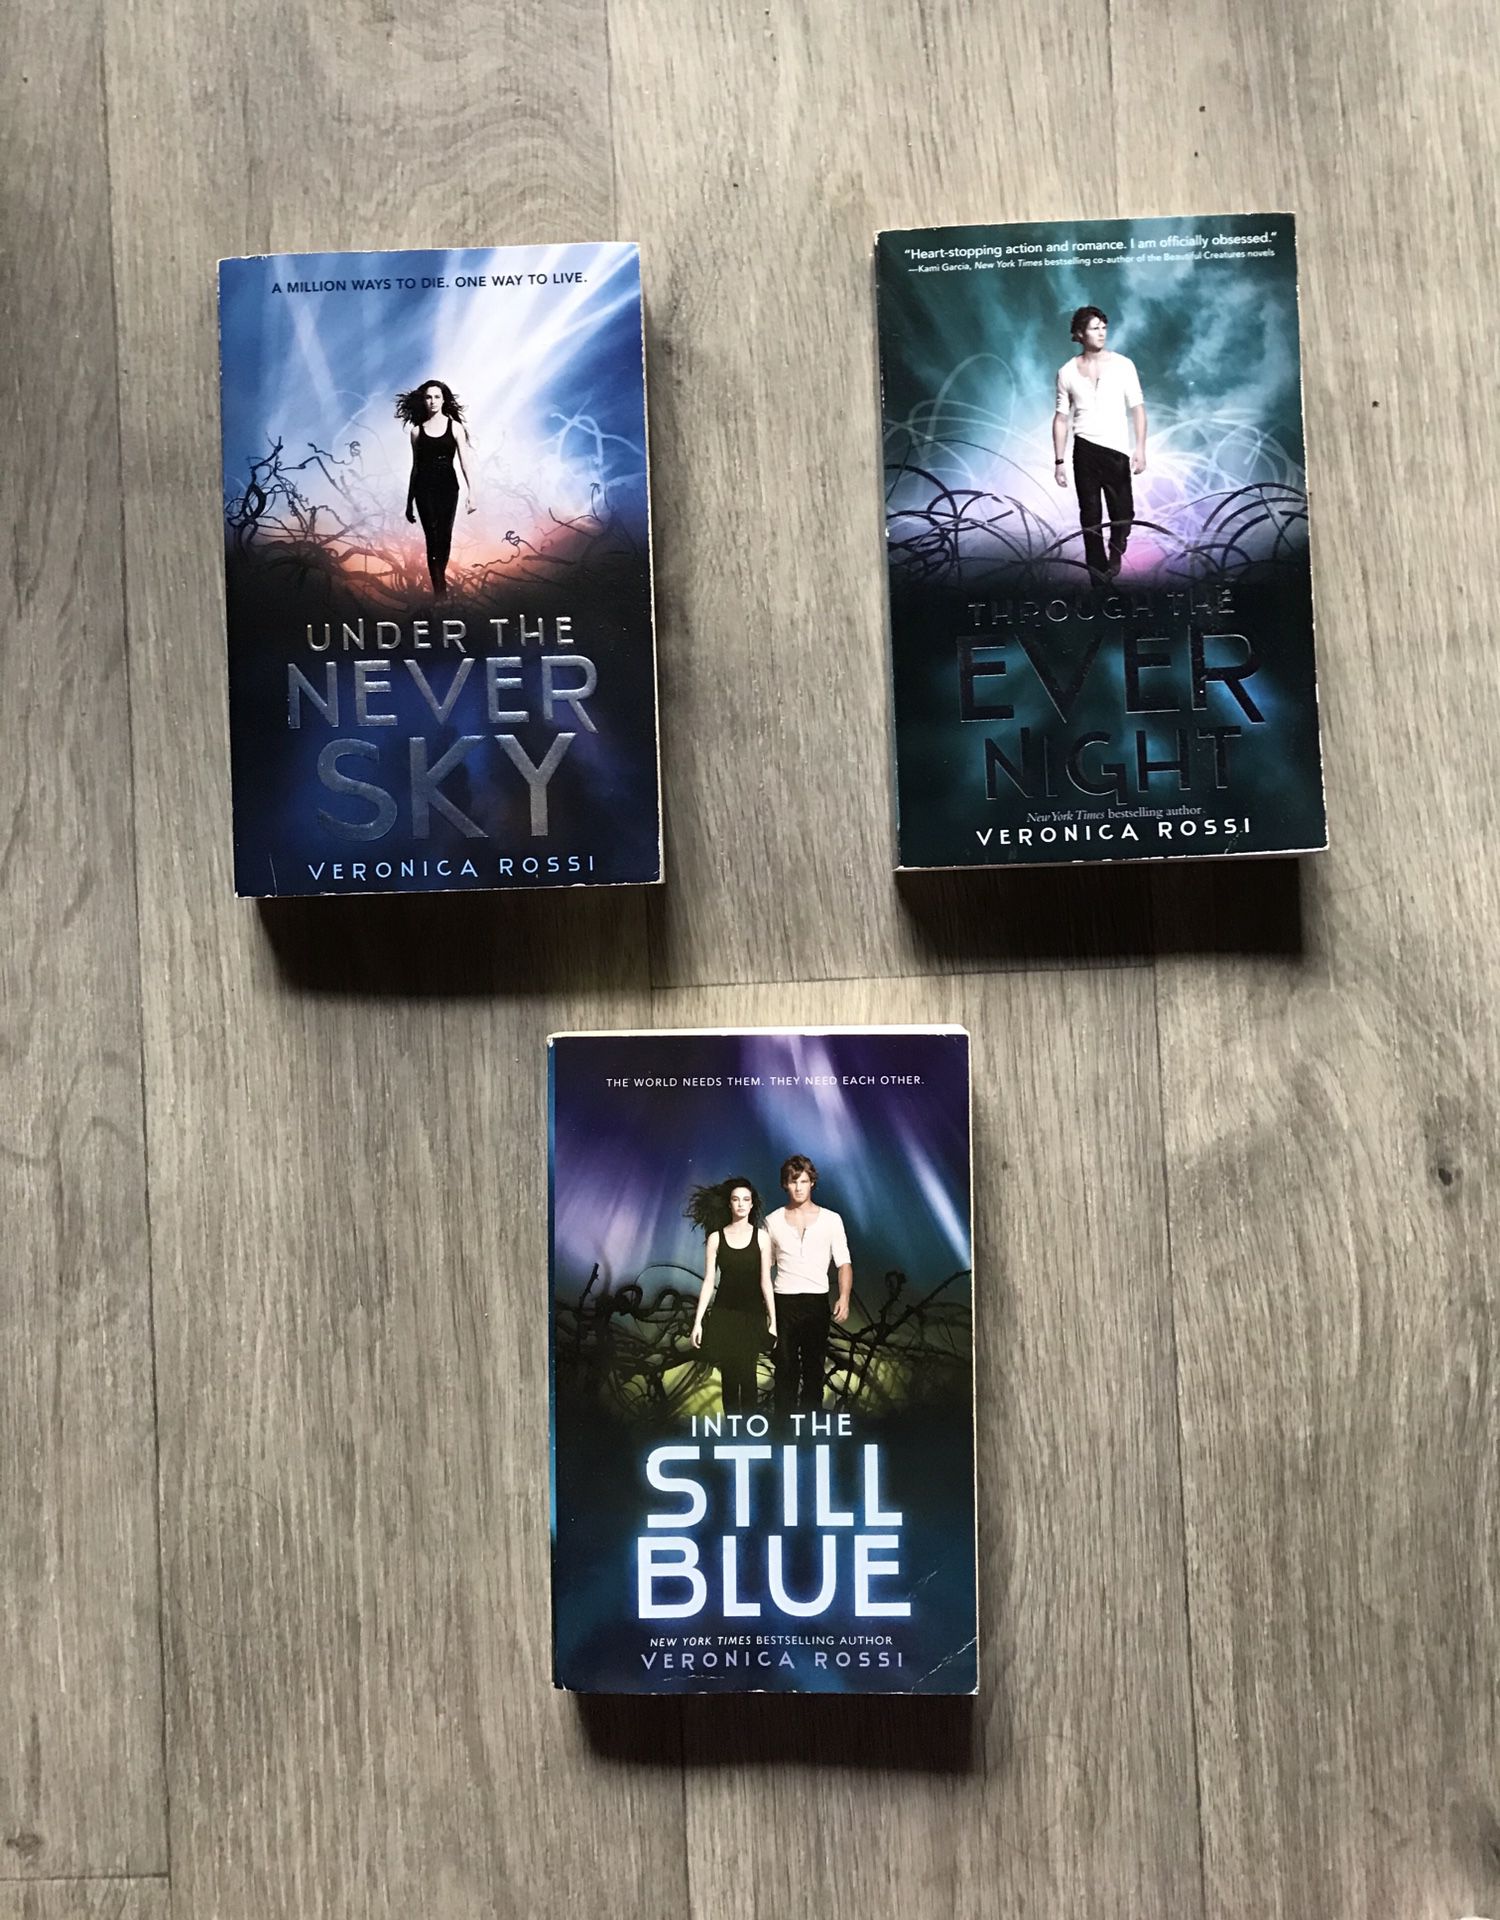 Under the Never Sky Trilogy books serie for young adult readers